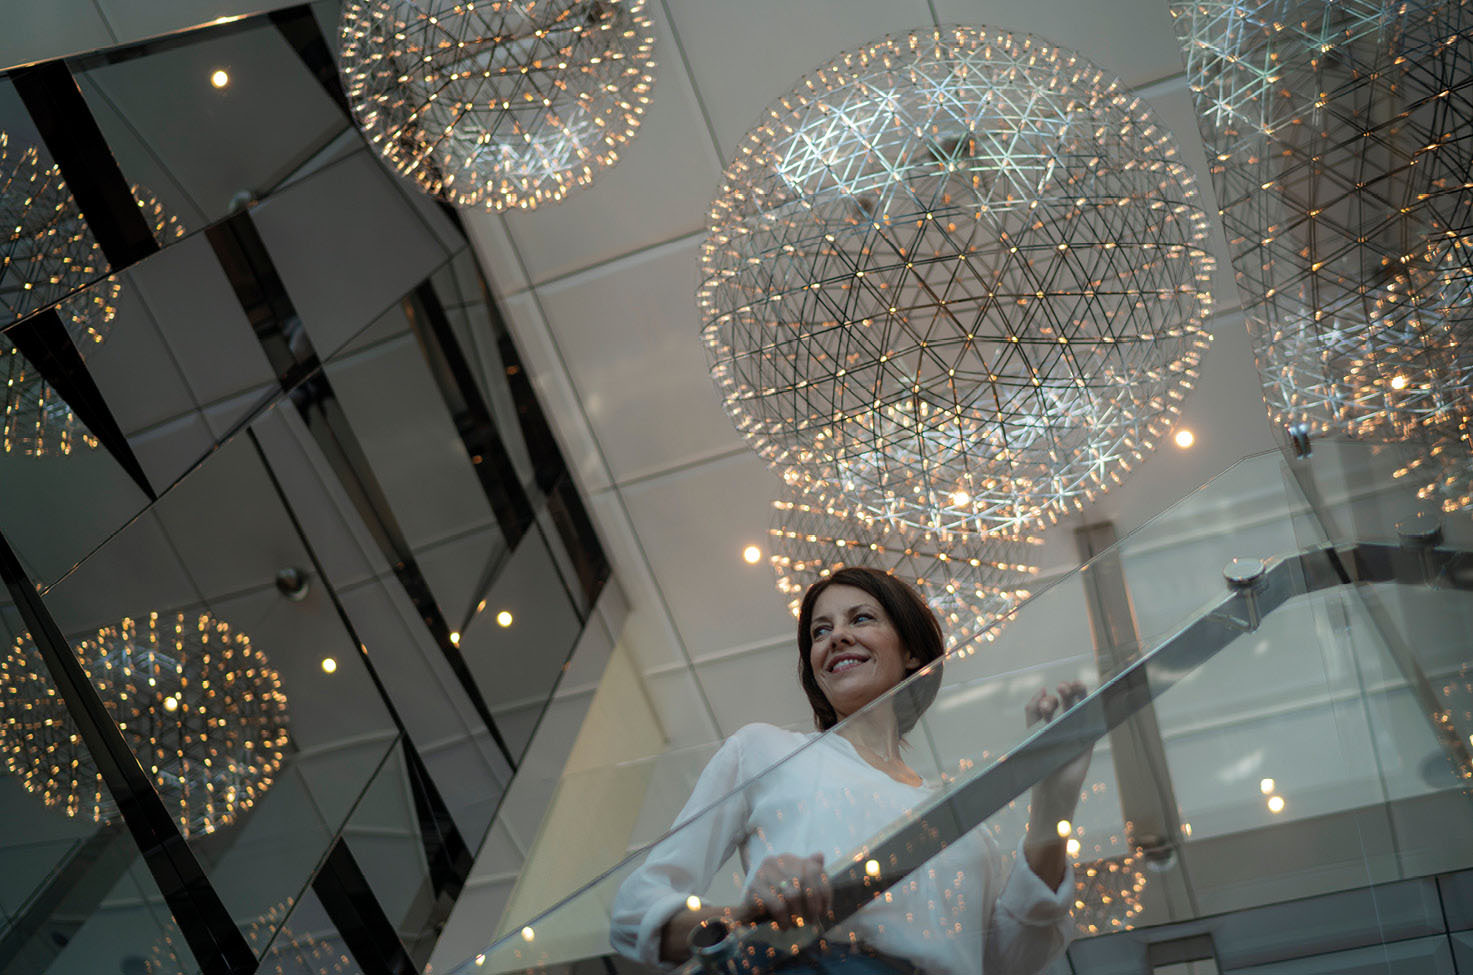 A woman on the stairs looking over the balcony and smiling, with stunning ornate lighting hanging from the ceiling